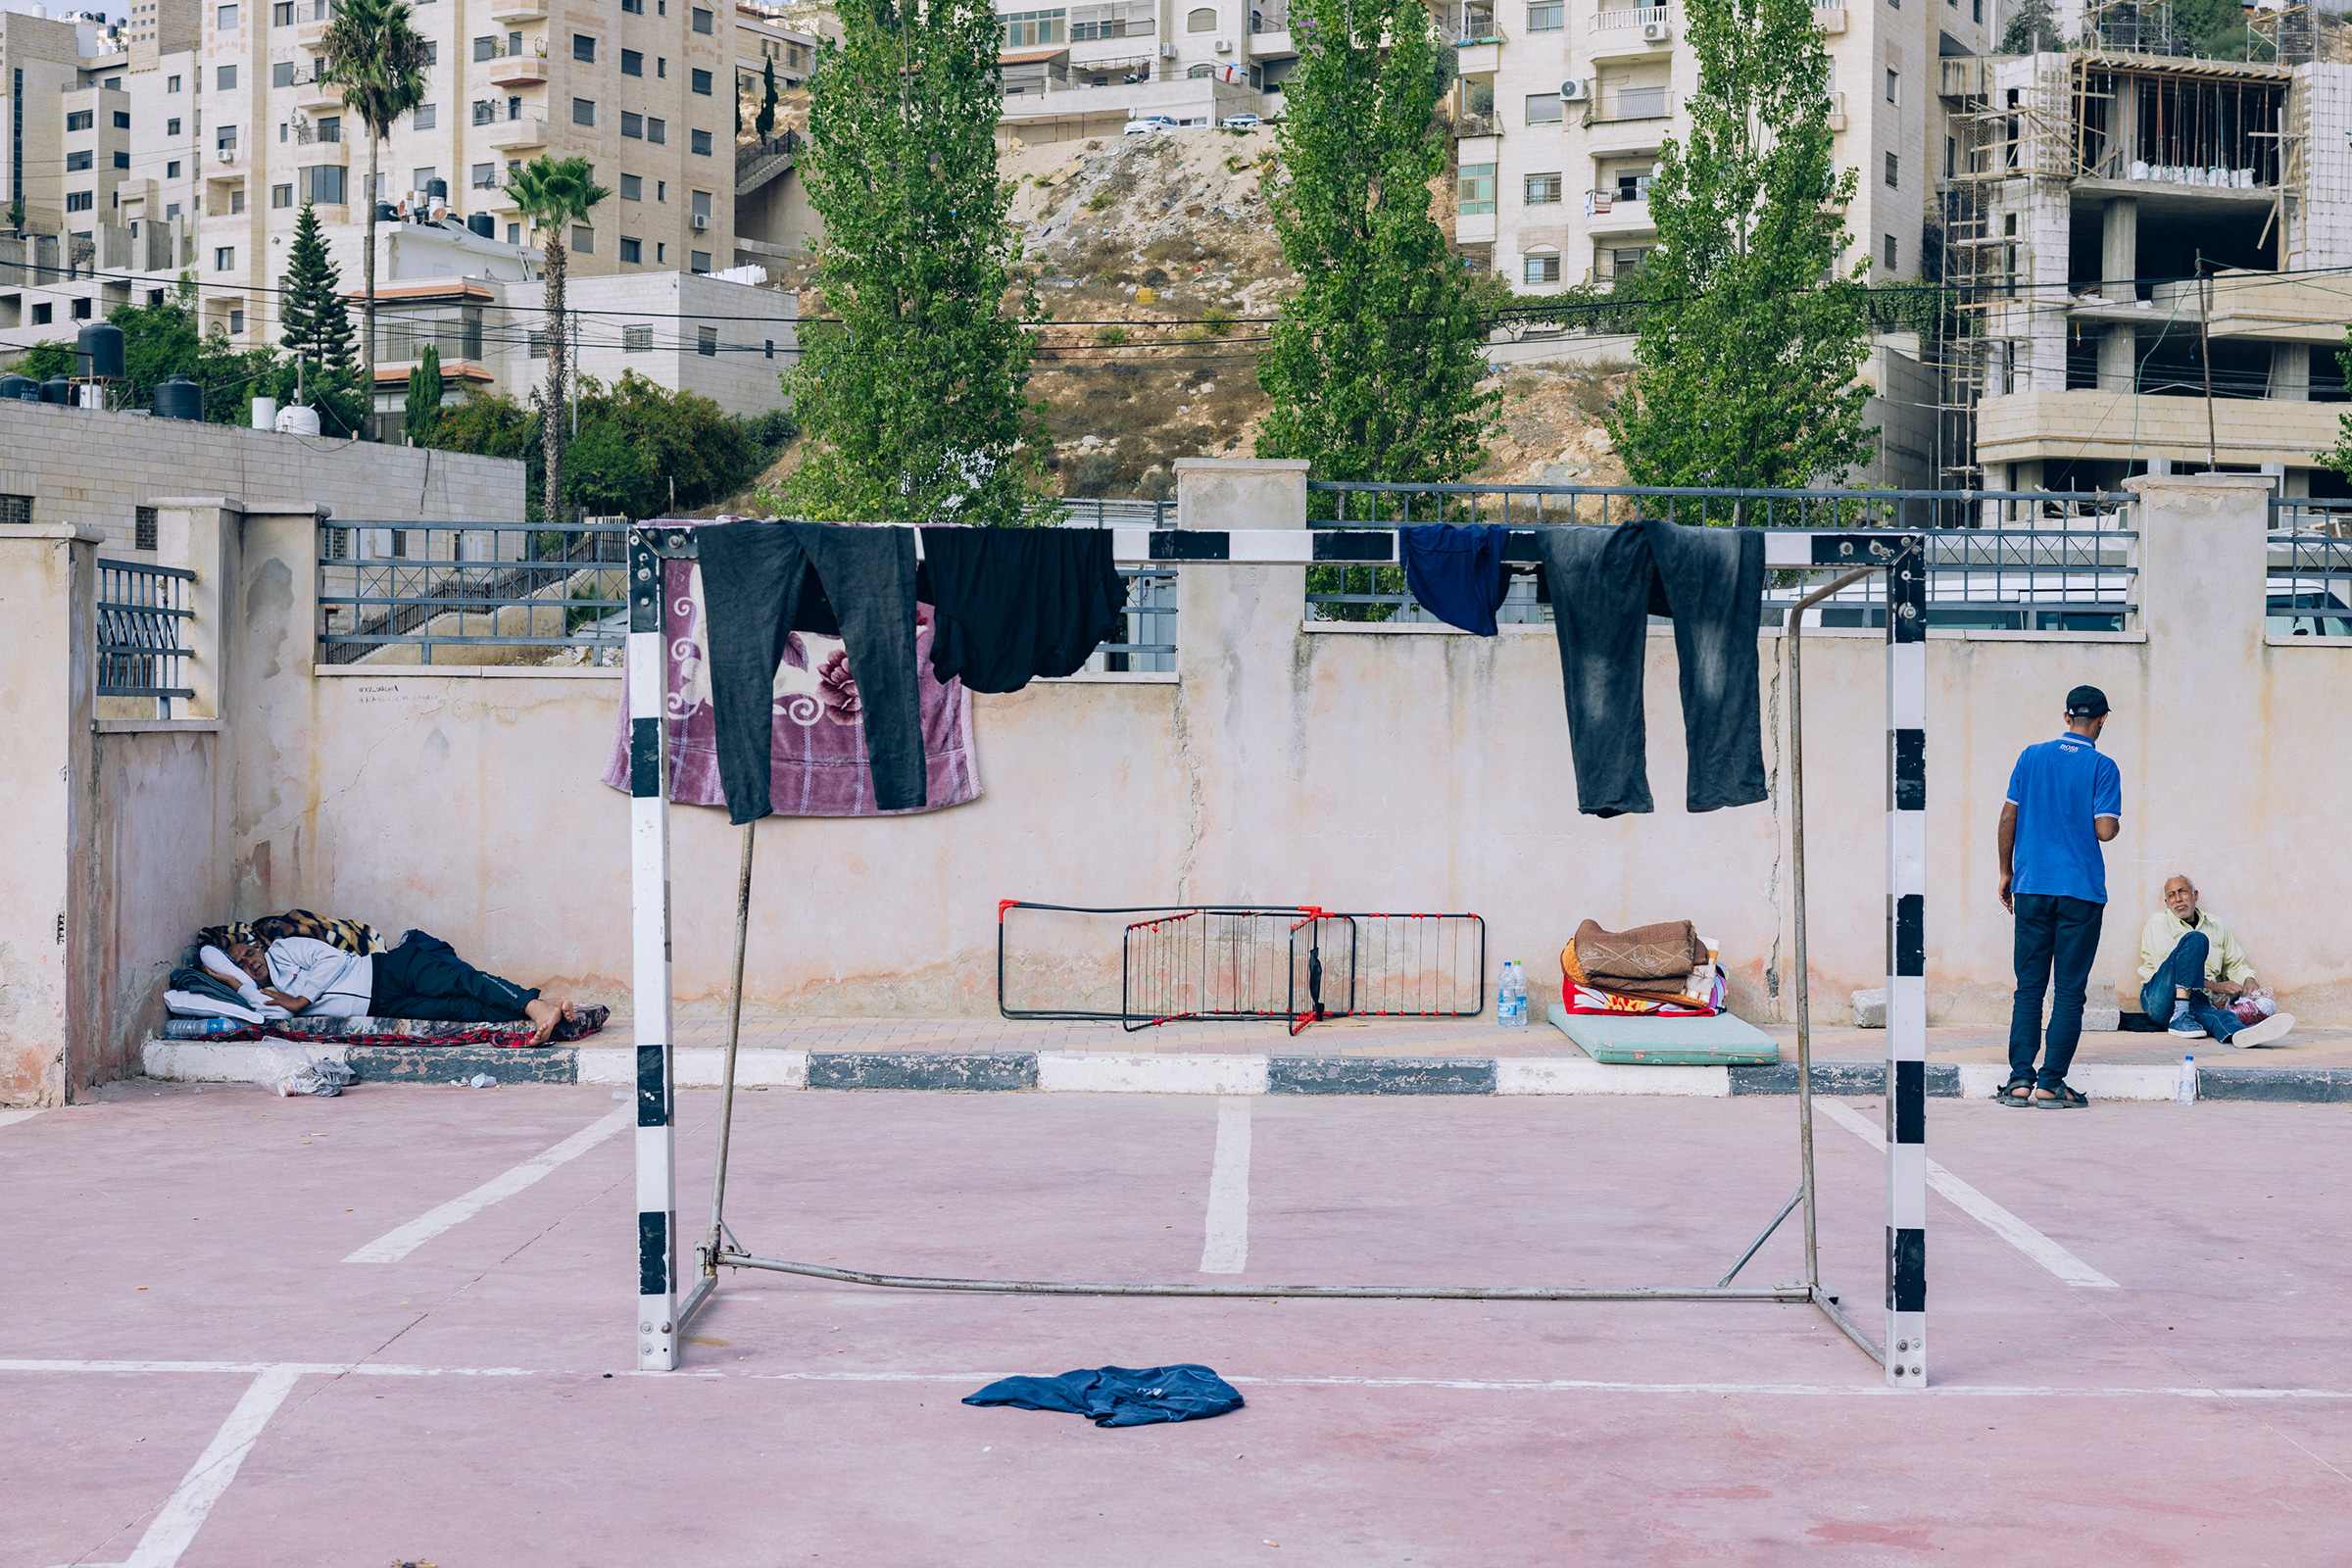 Clothes belonging to Gazan workers who were stuck inside Israel on Oct. 7th hang to dry on a soccer goal at the Redanna Sports Complex in the West Bank city of Ramallah, on Oct. 14.